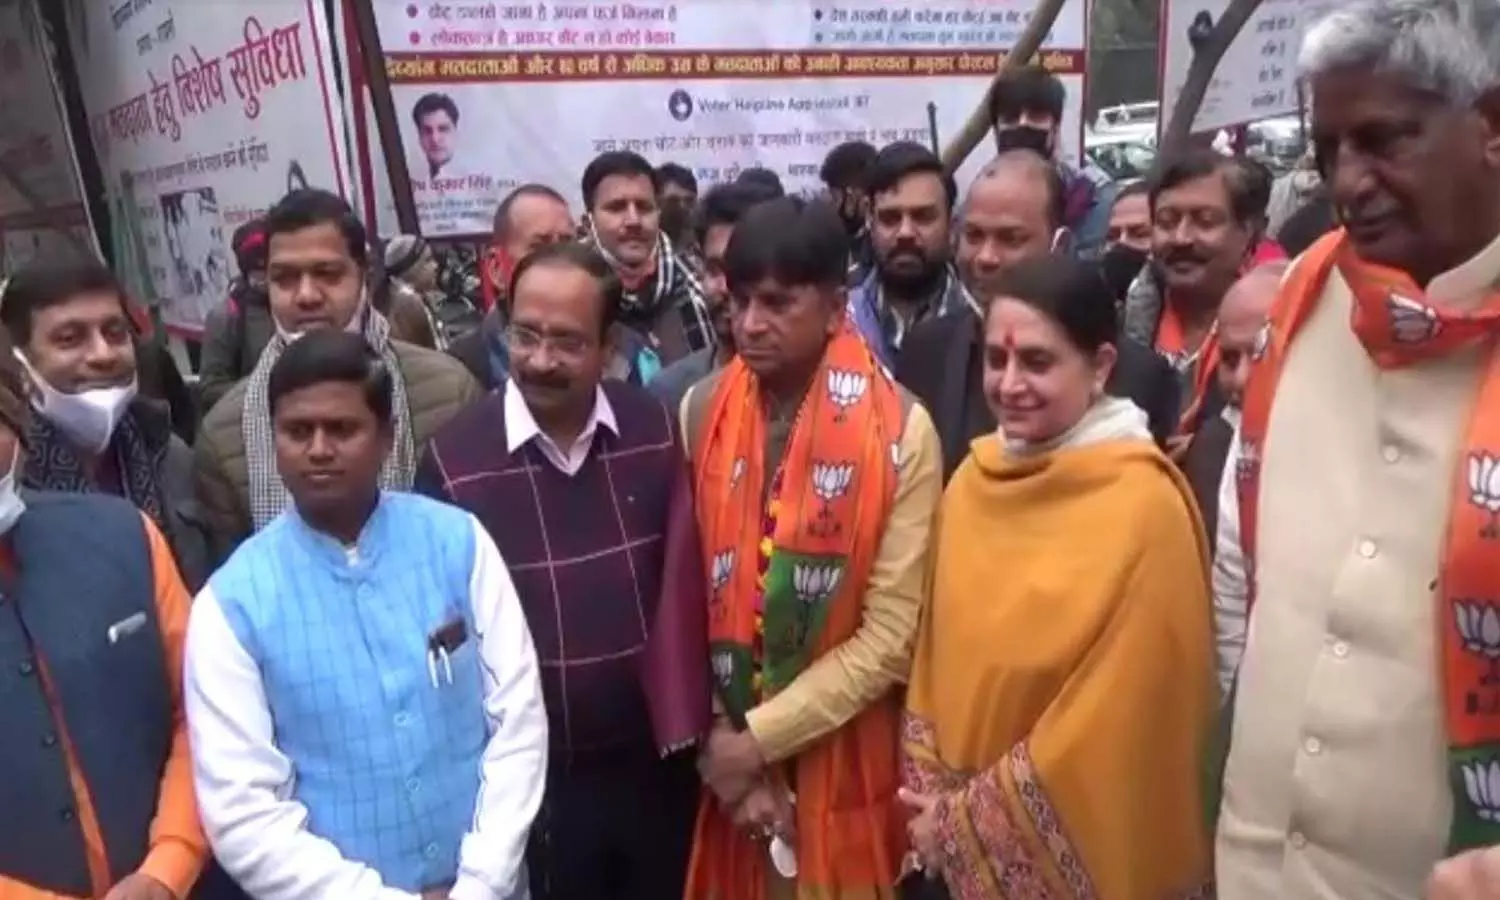 UP Election 2022: Two BJP candidates filed nomination in Shamli, said- security and development will remain issues